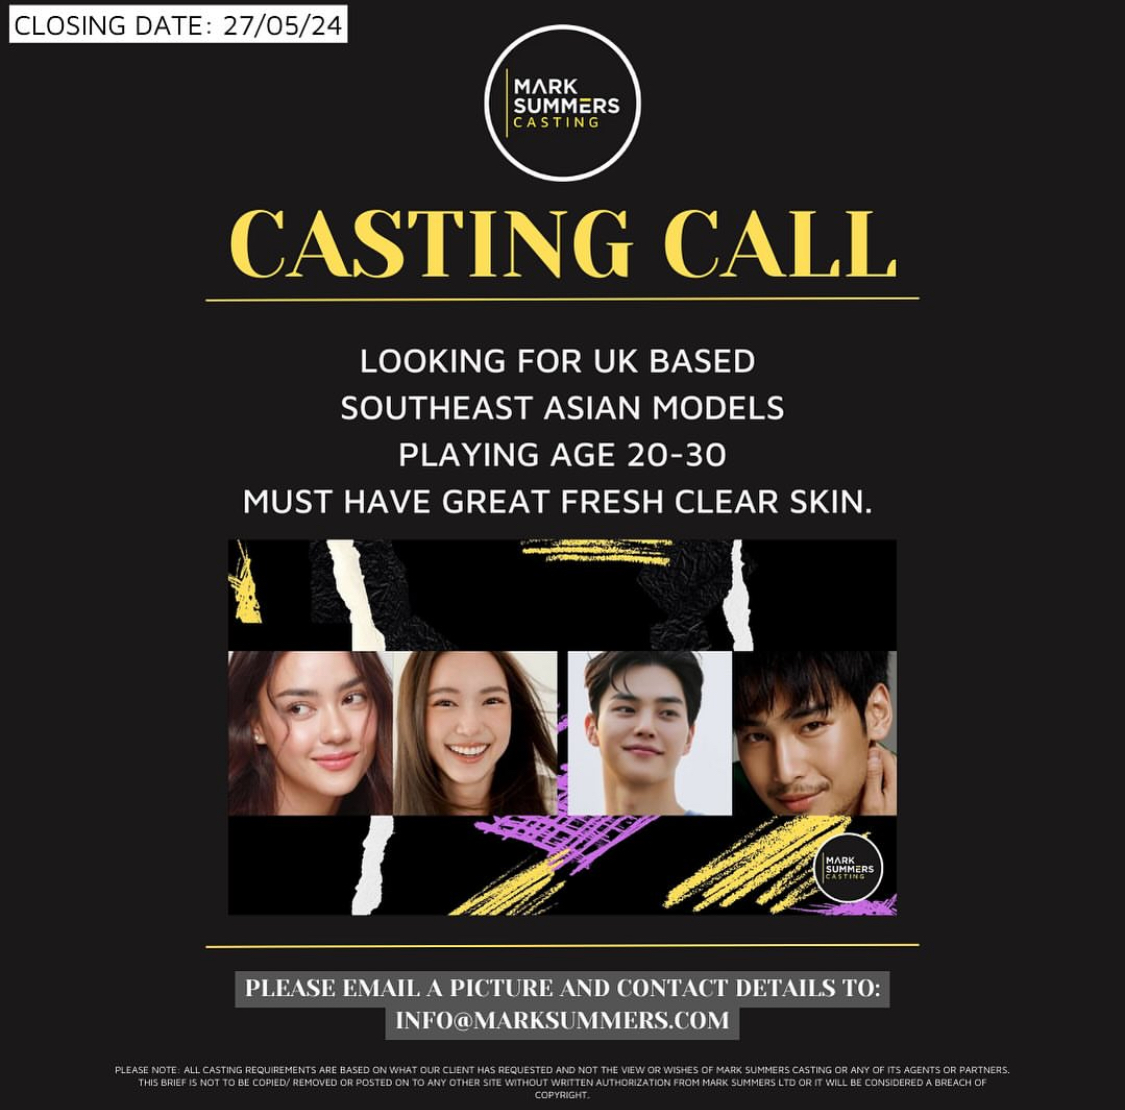 Urgent #castingcall #Skincare brand.Global campaign casting in Thursday London Casting for #southeastasian #panasian models playing age 20-30 years old email photos & info@marksummers.com RT RT #castingdirector #paid #marksummerscasting